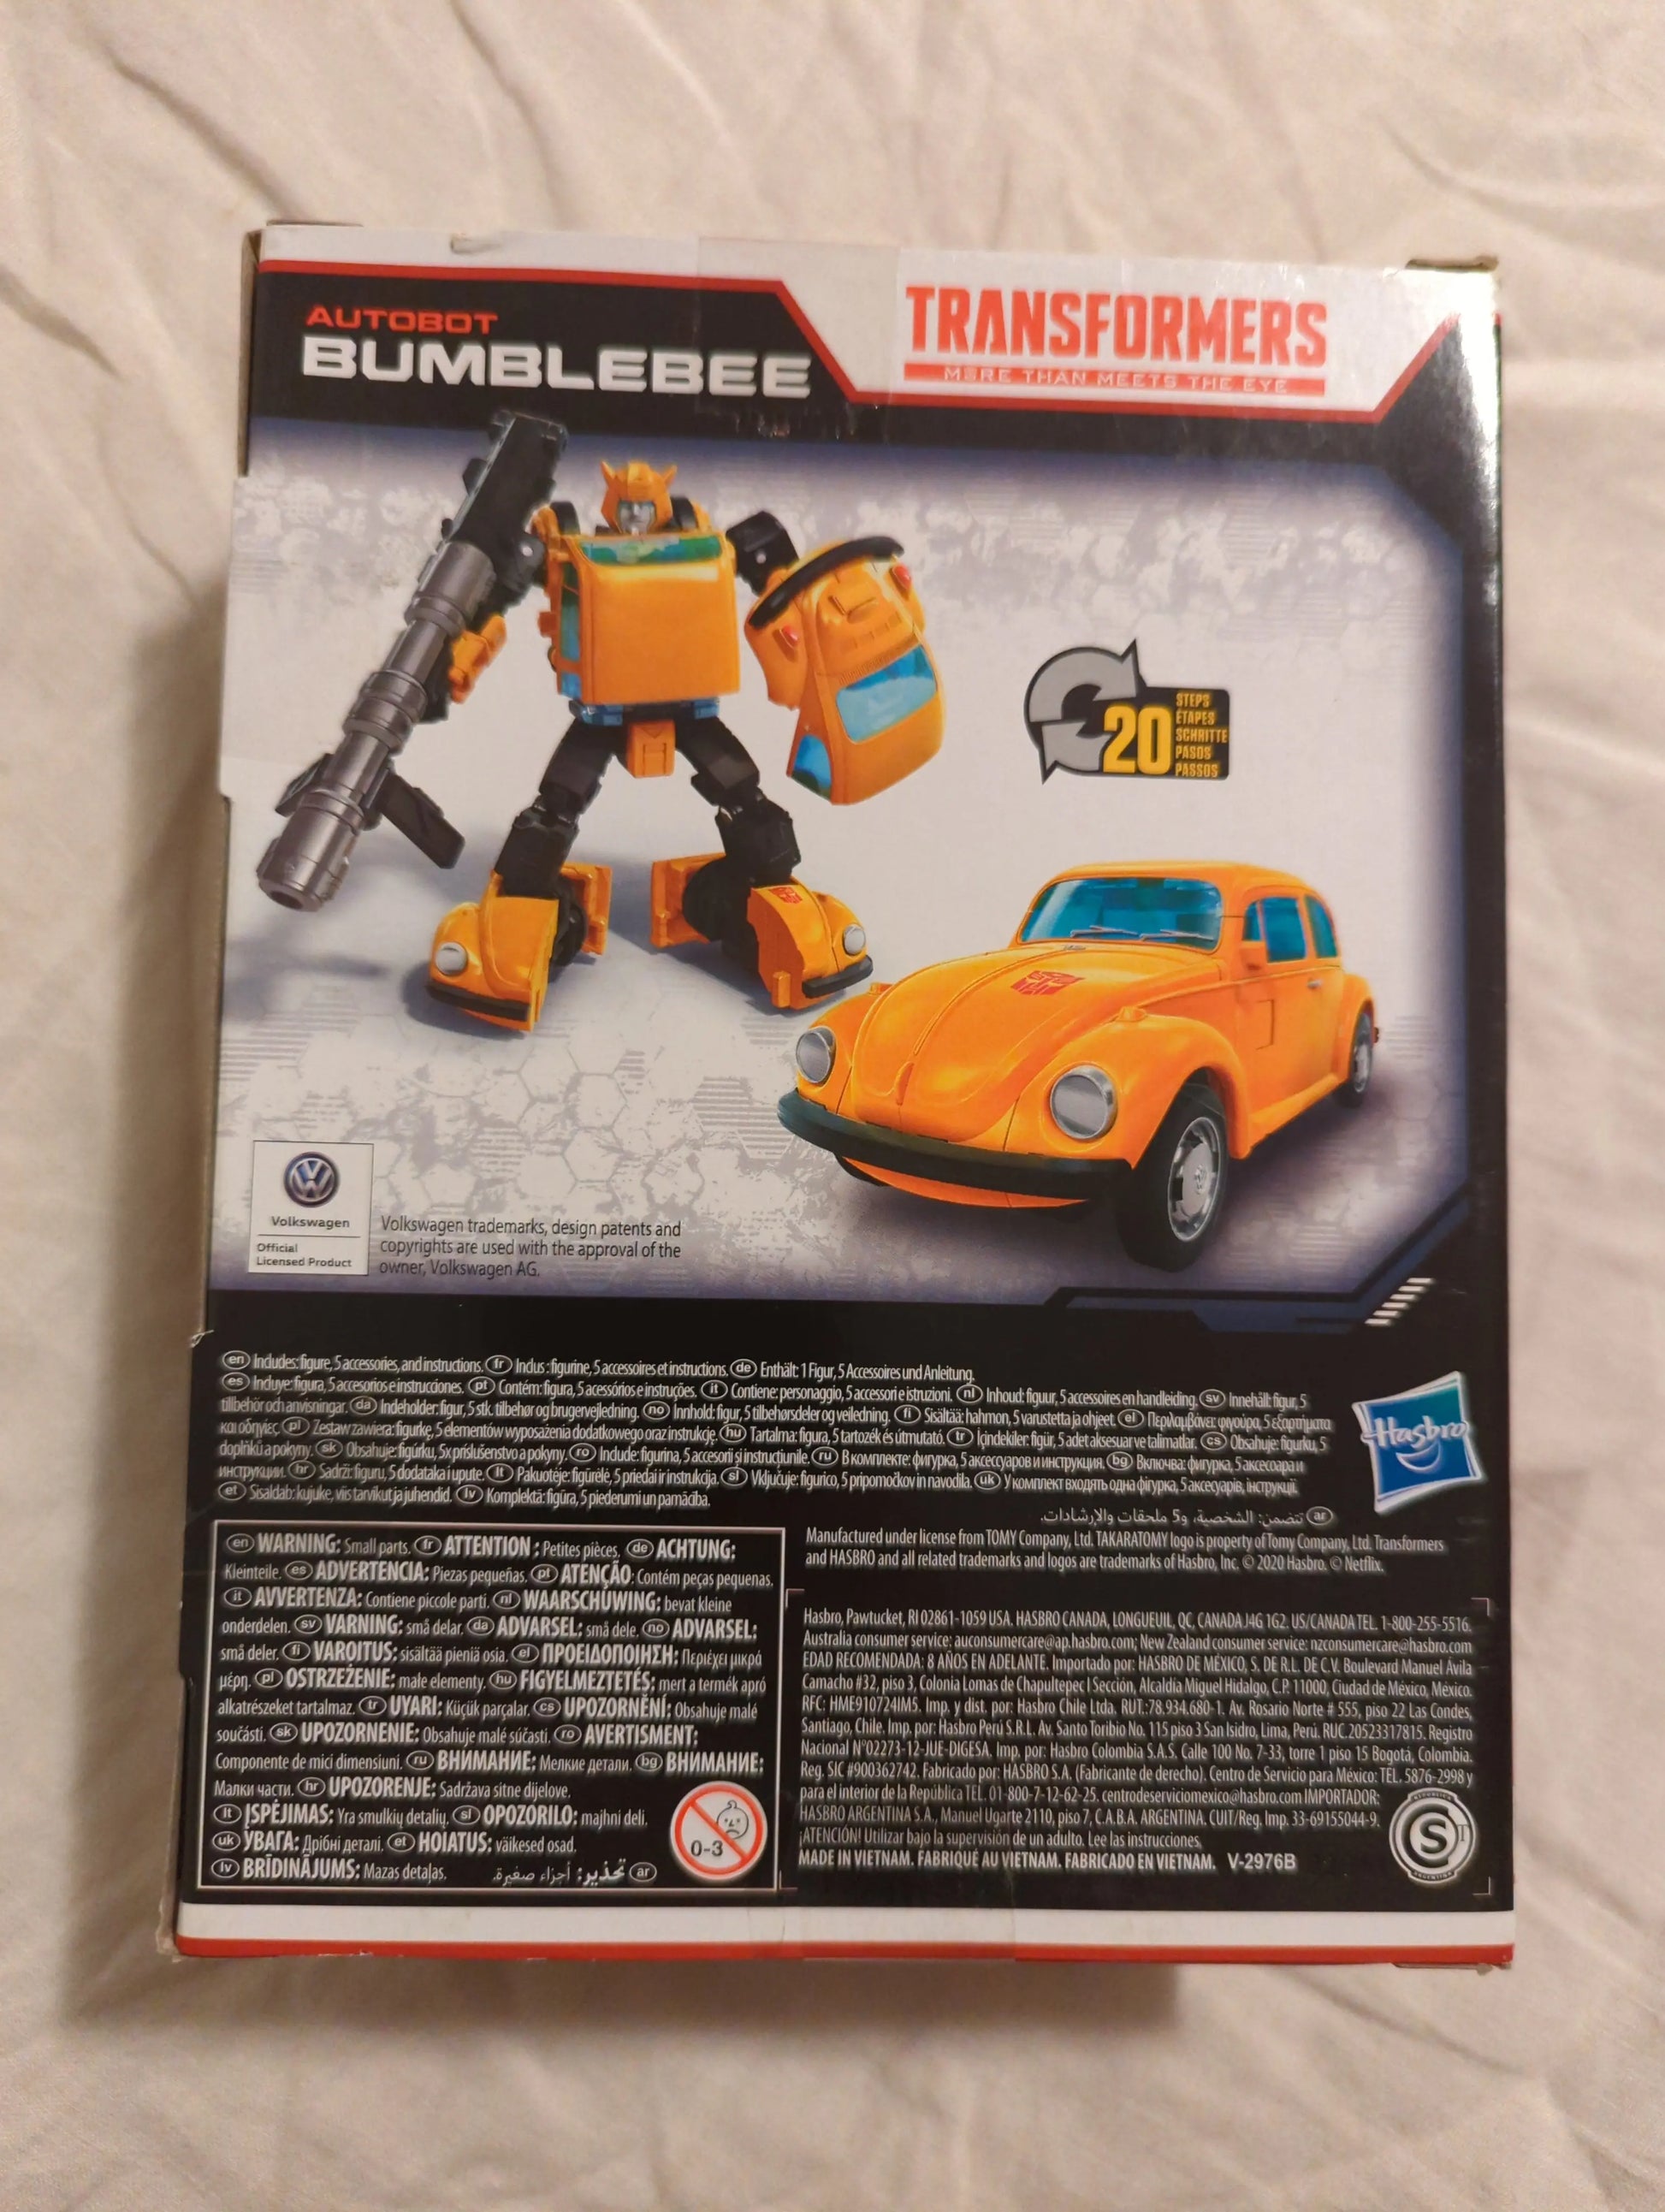 Hasbro Transformers War for Cybertron Bumblebee Action Figure (F0702) FRENLY BRICKS - Open 7 Days